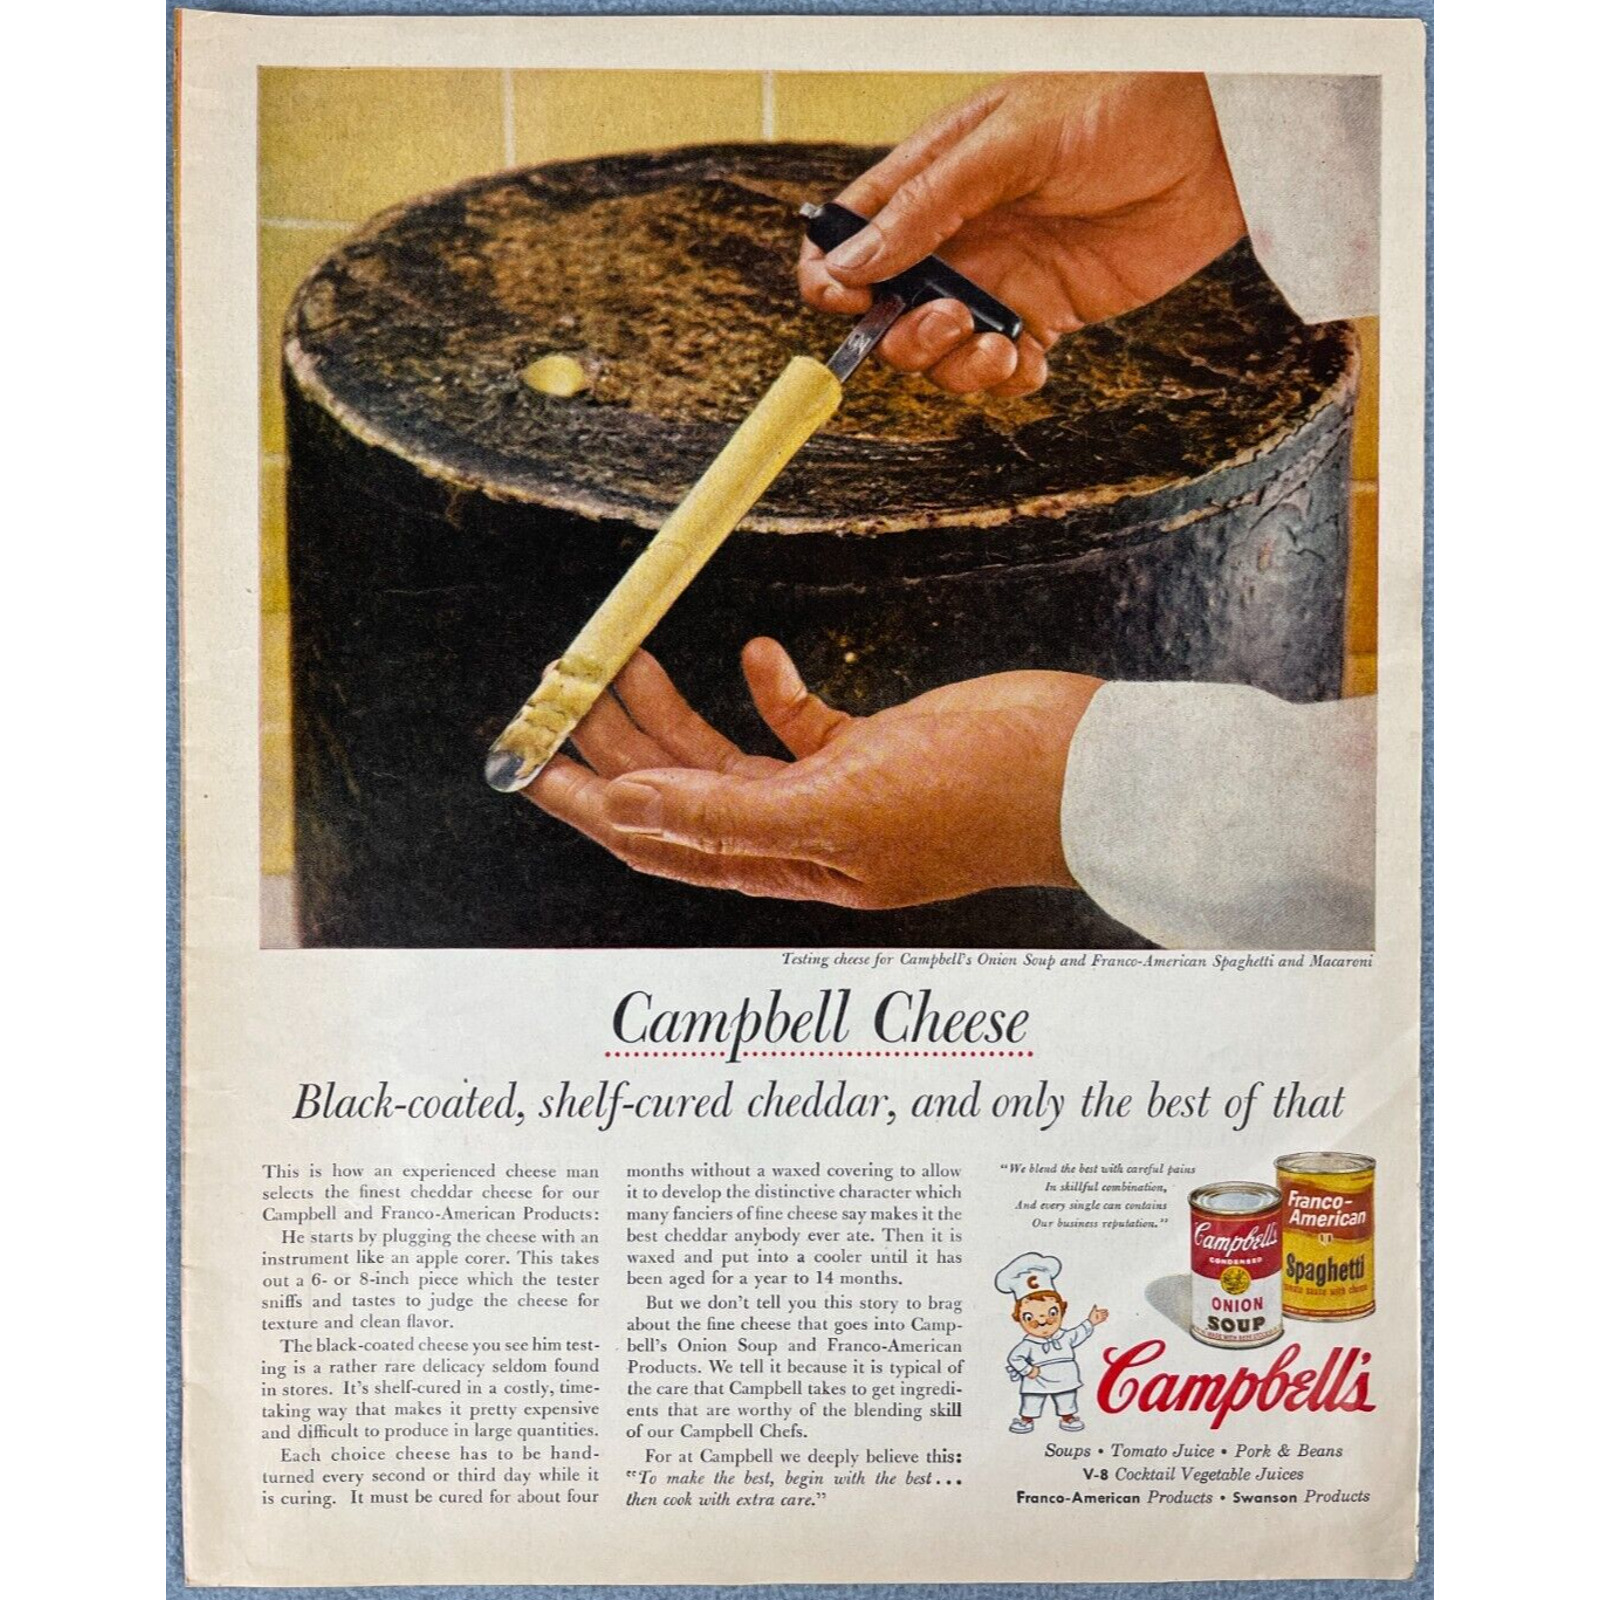 1956 Campbell\'s Cheese Vintage Print Ad Black Coated Self Cured Cheddar Swanson